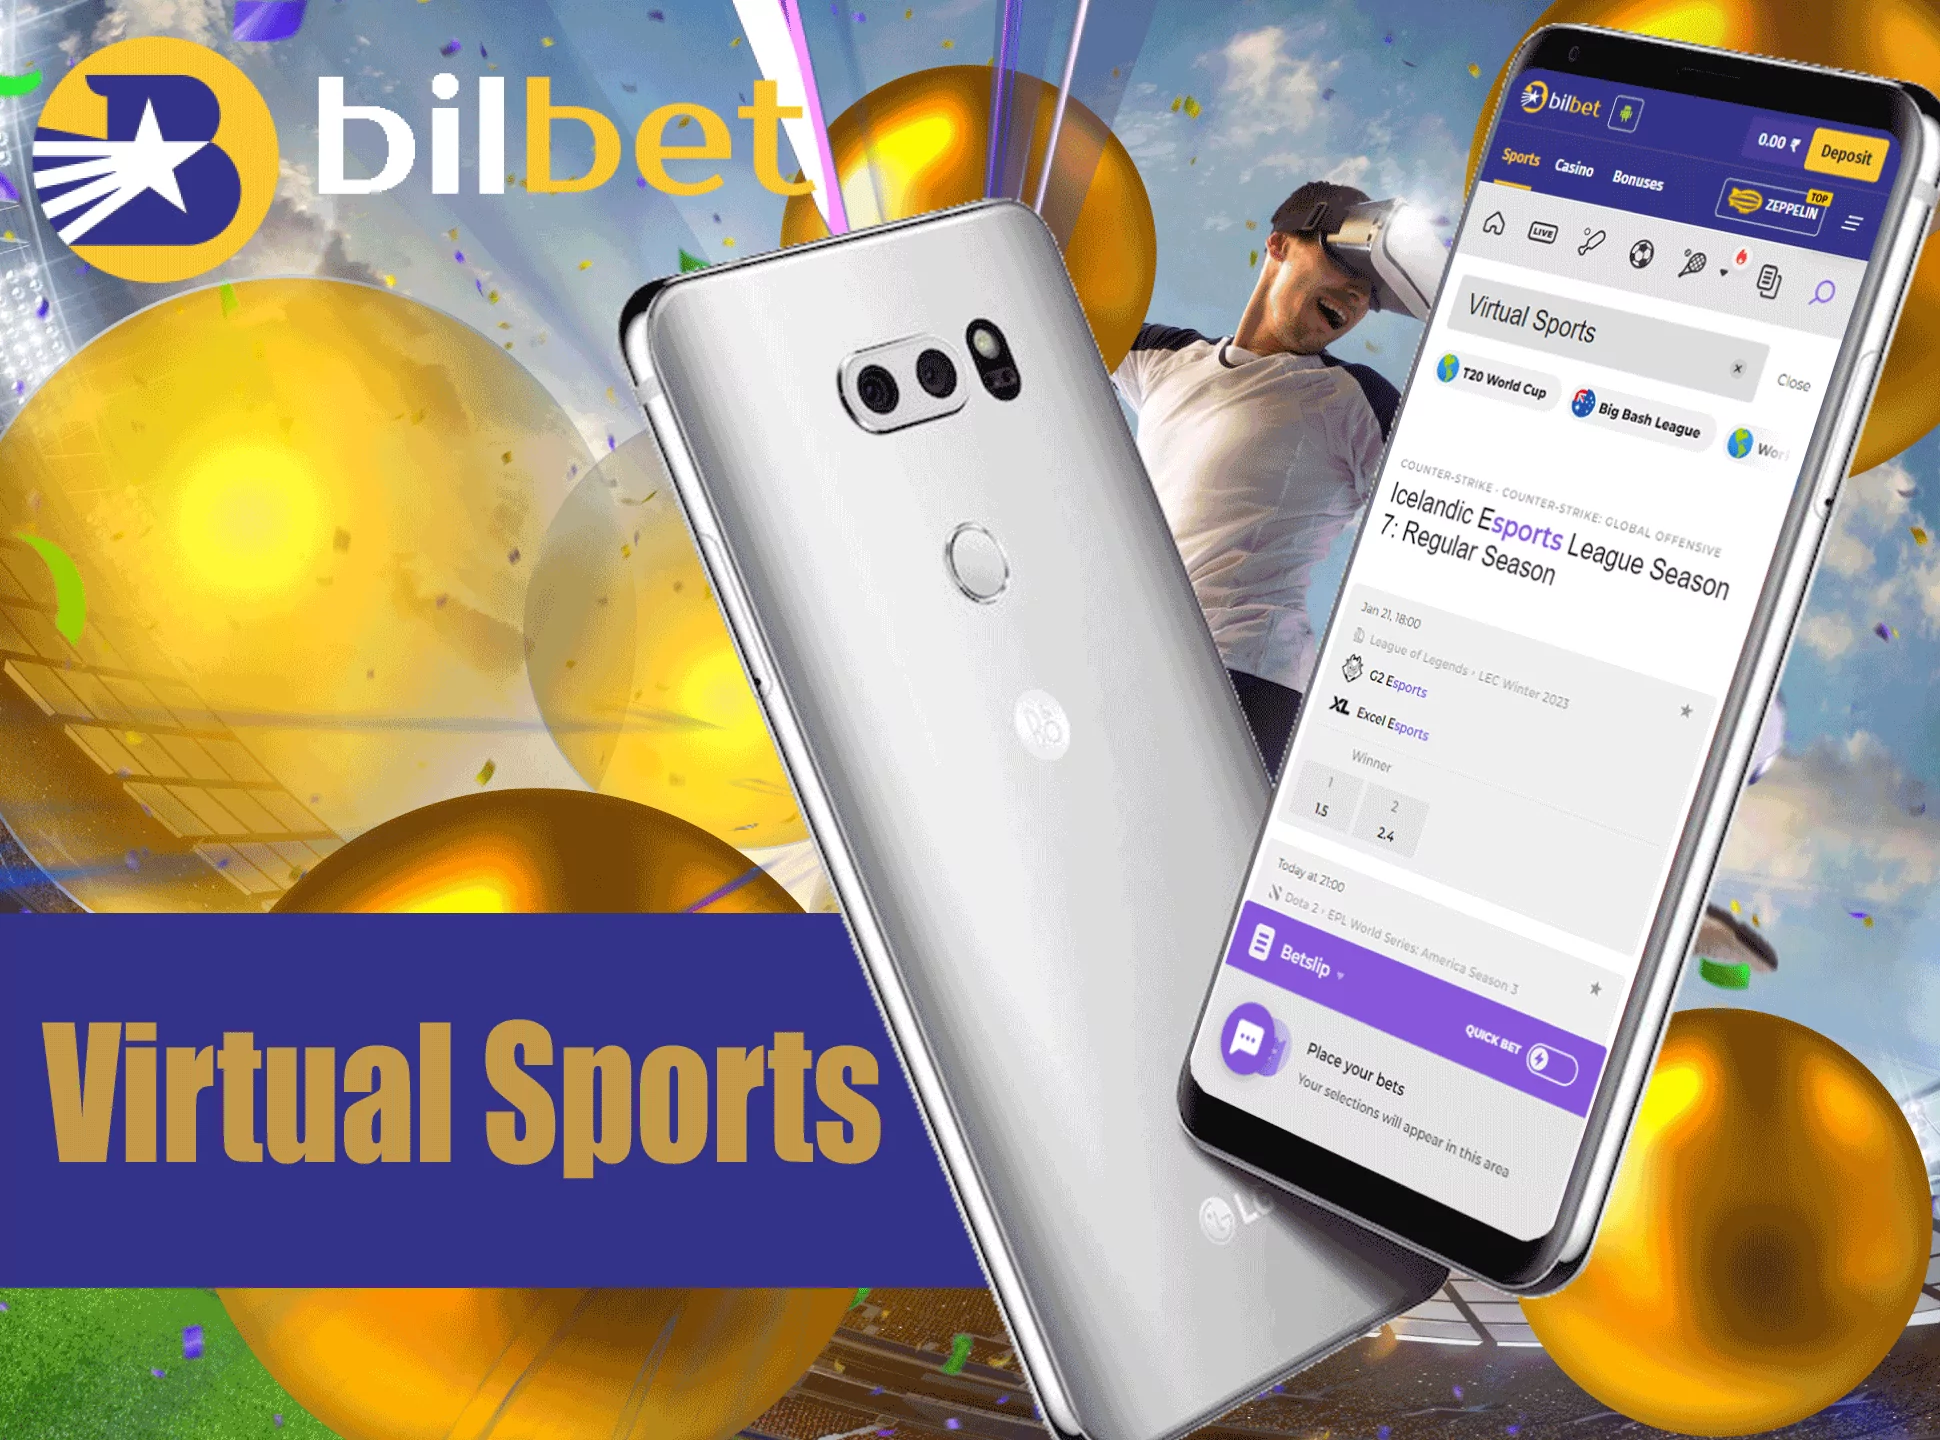 You can also place bets on the virtua; sports in the Bilbet application.